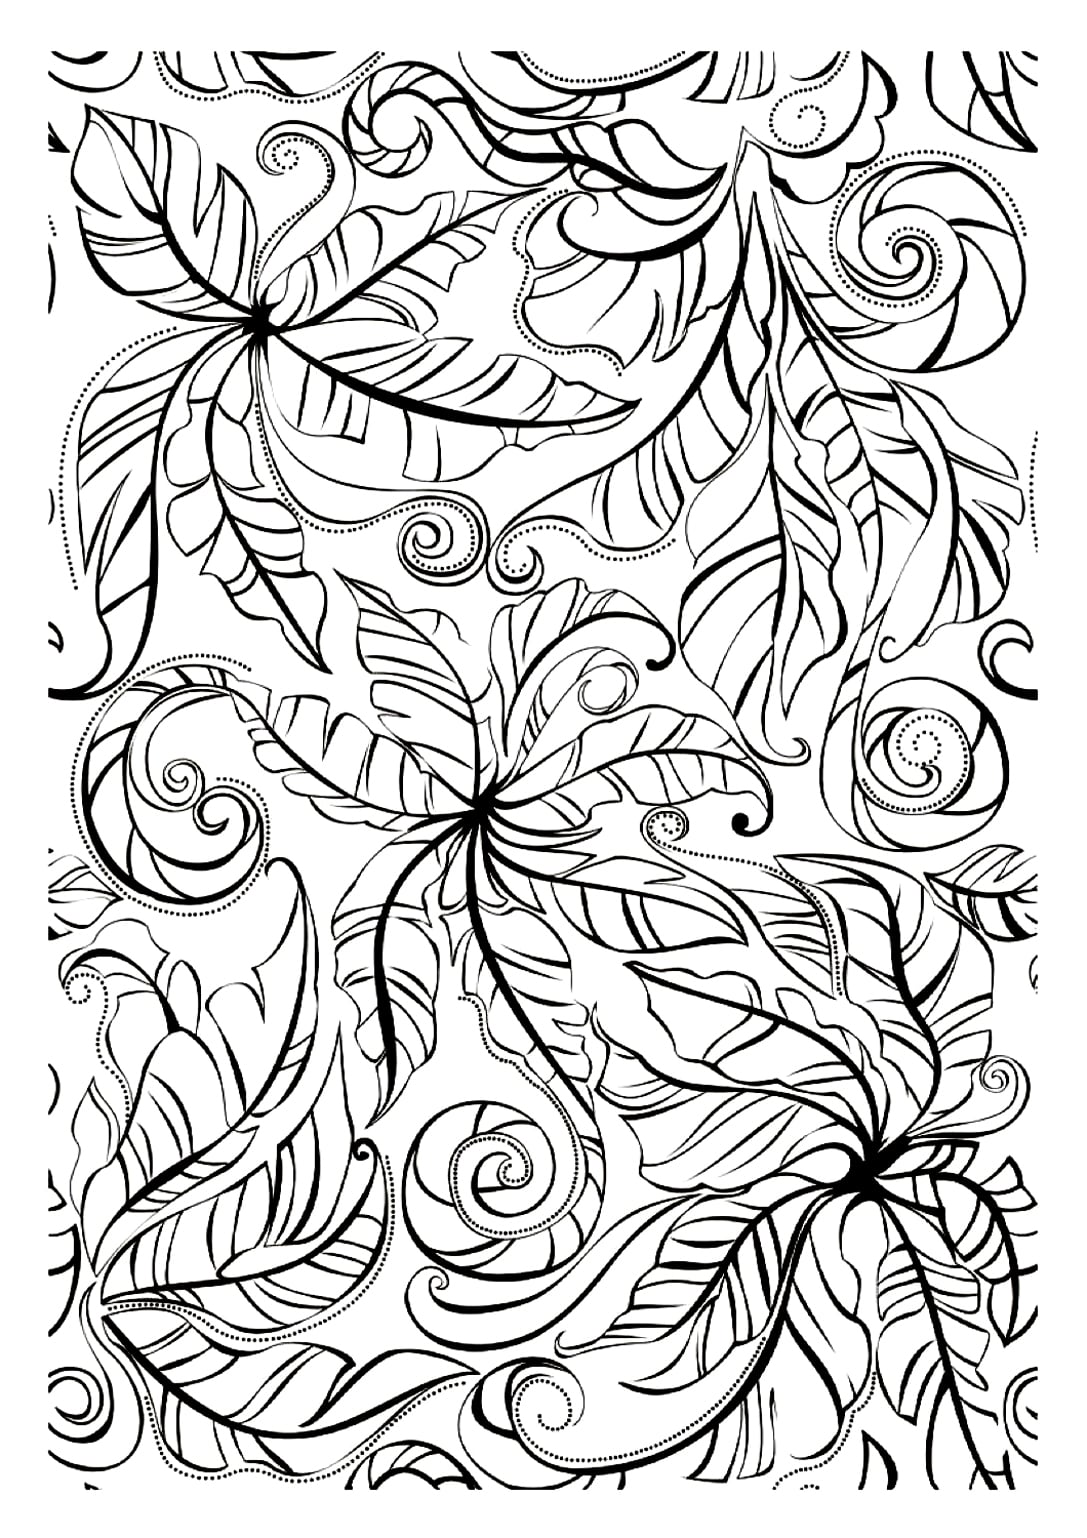 fletcher and the falling leaves coloring pages | fall leaves coloring mandala | fall leaves printing pages